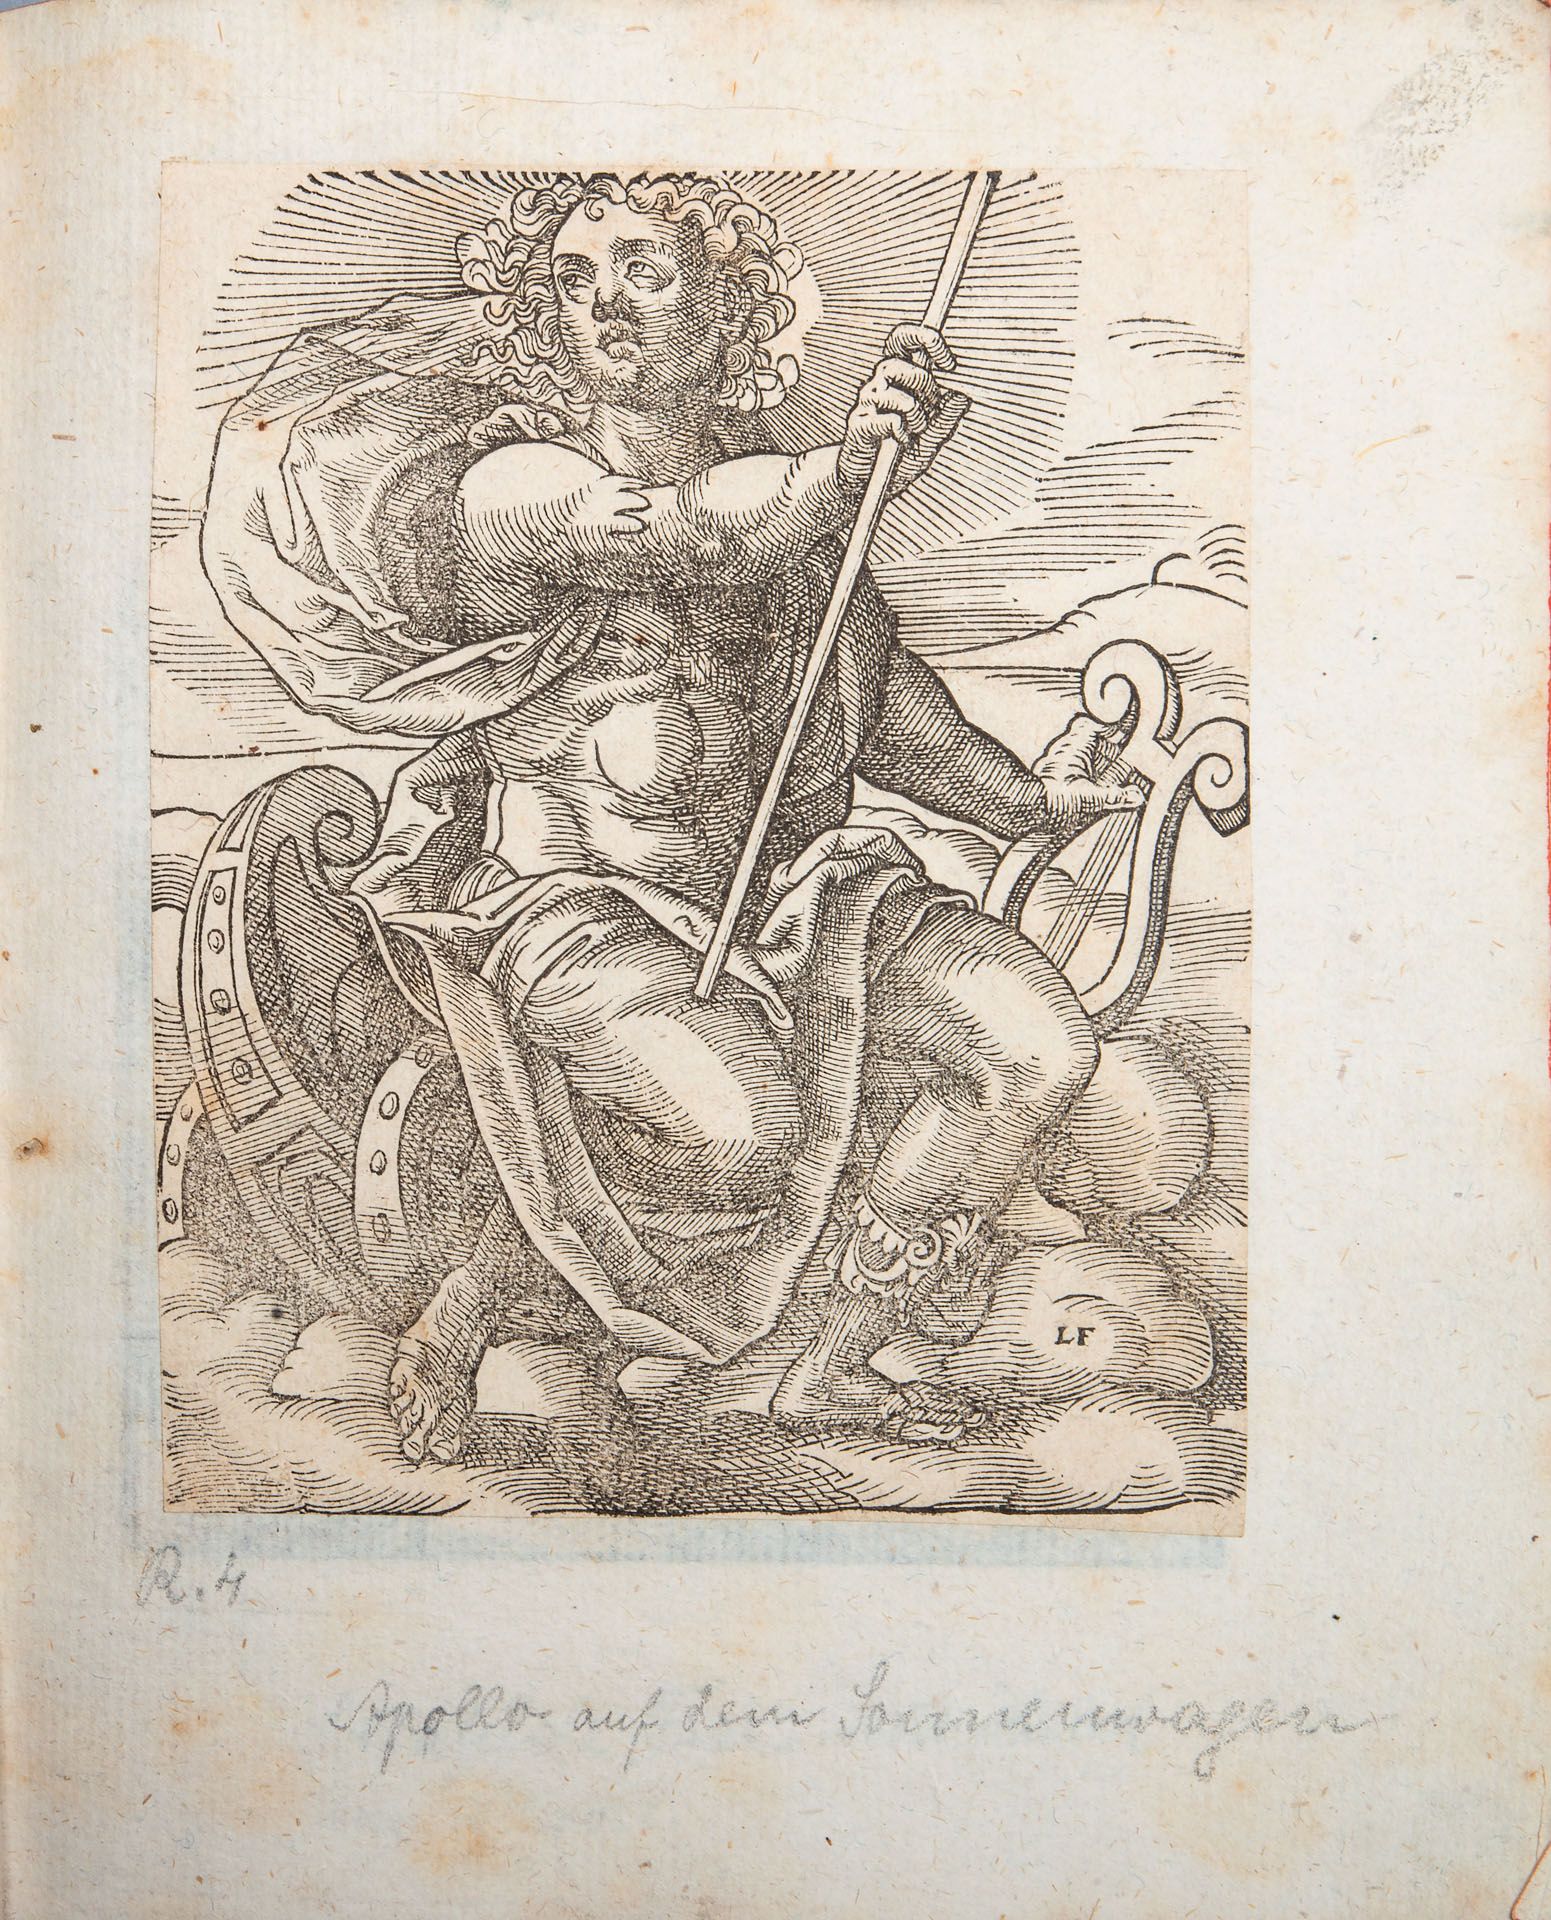 Jost Amman (1539-1591), An Album of 32 Original Engraving from the 16th Century - Image 5 of 7